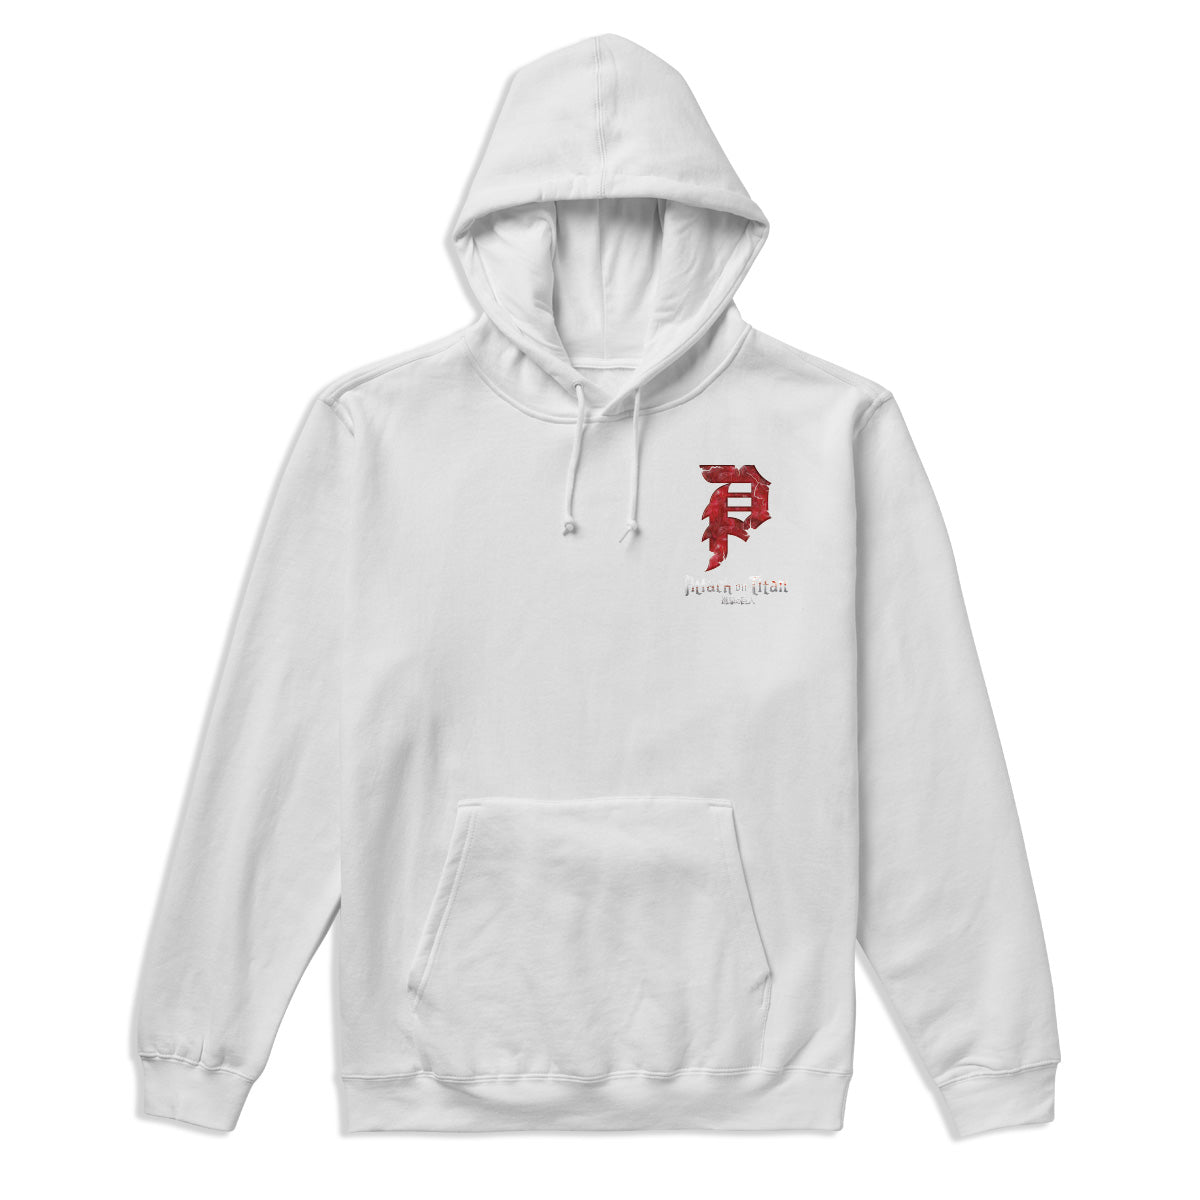 Primitive x Titans Armored Dirty P Hoodie - White image 2